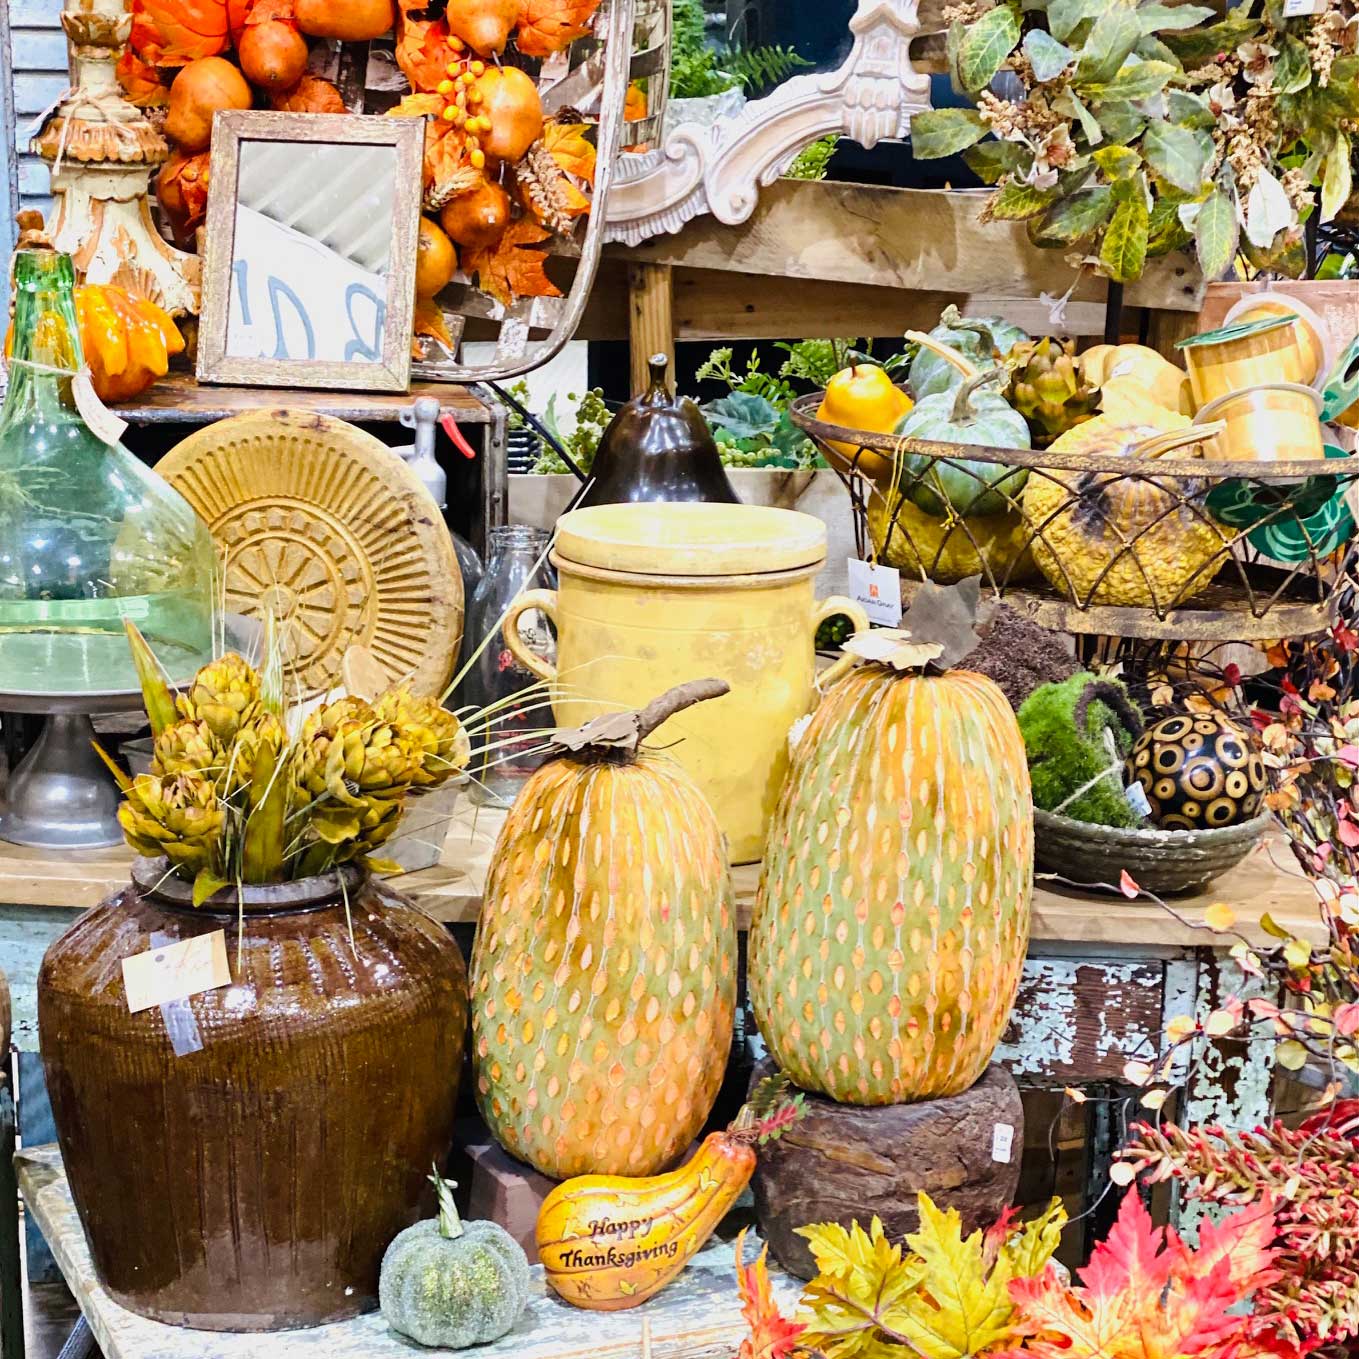 Image of variety of colorful gourds, knick knacks, and other decor items for a Fall flavor at Frisco Mercantile